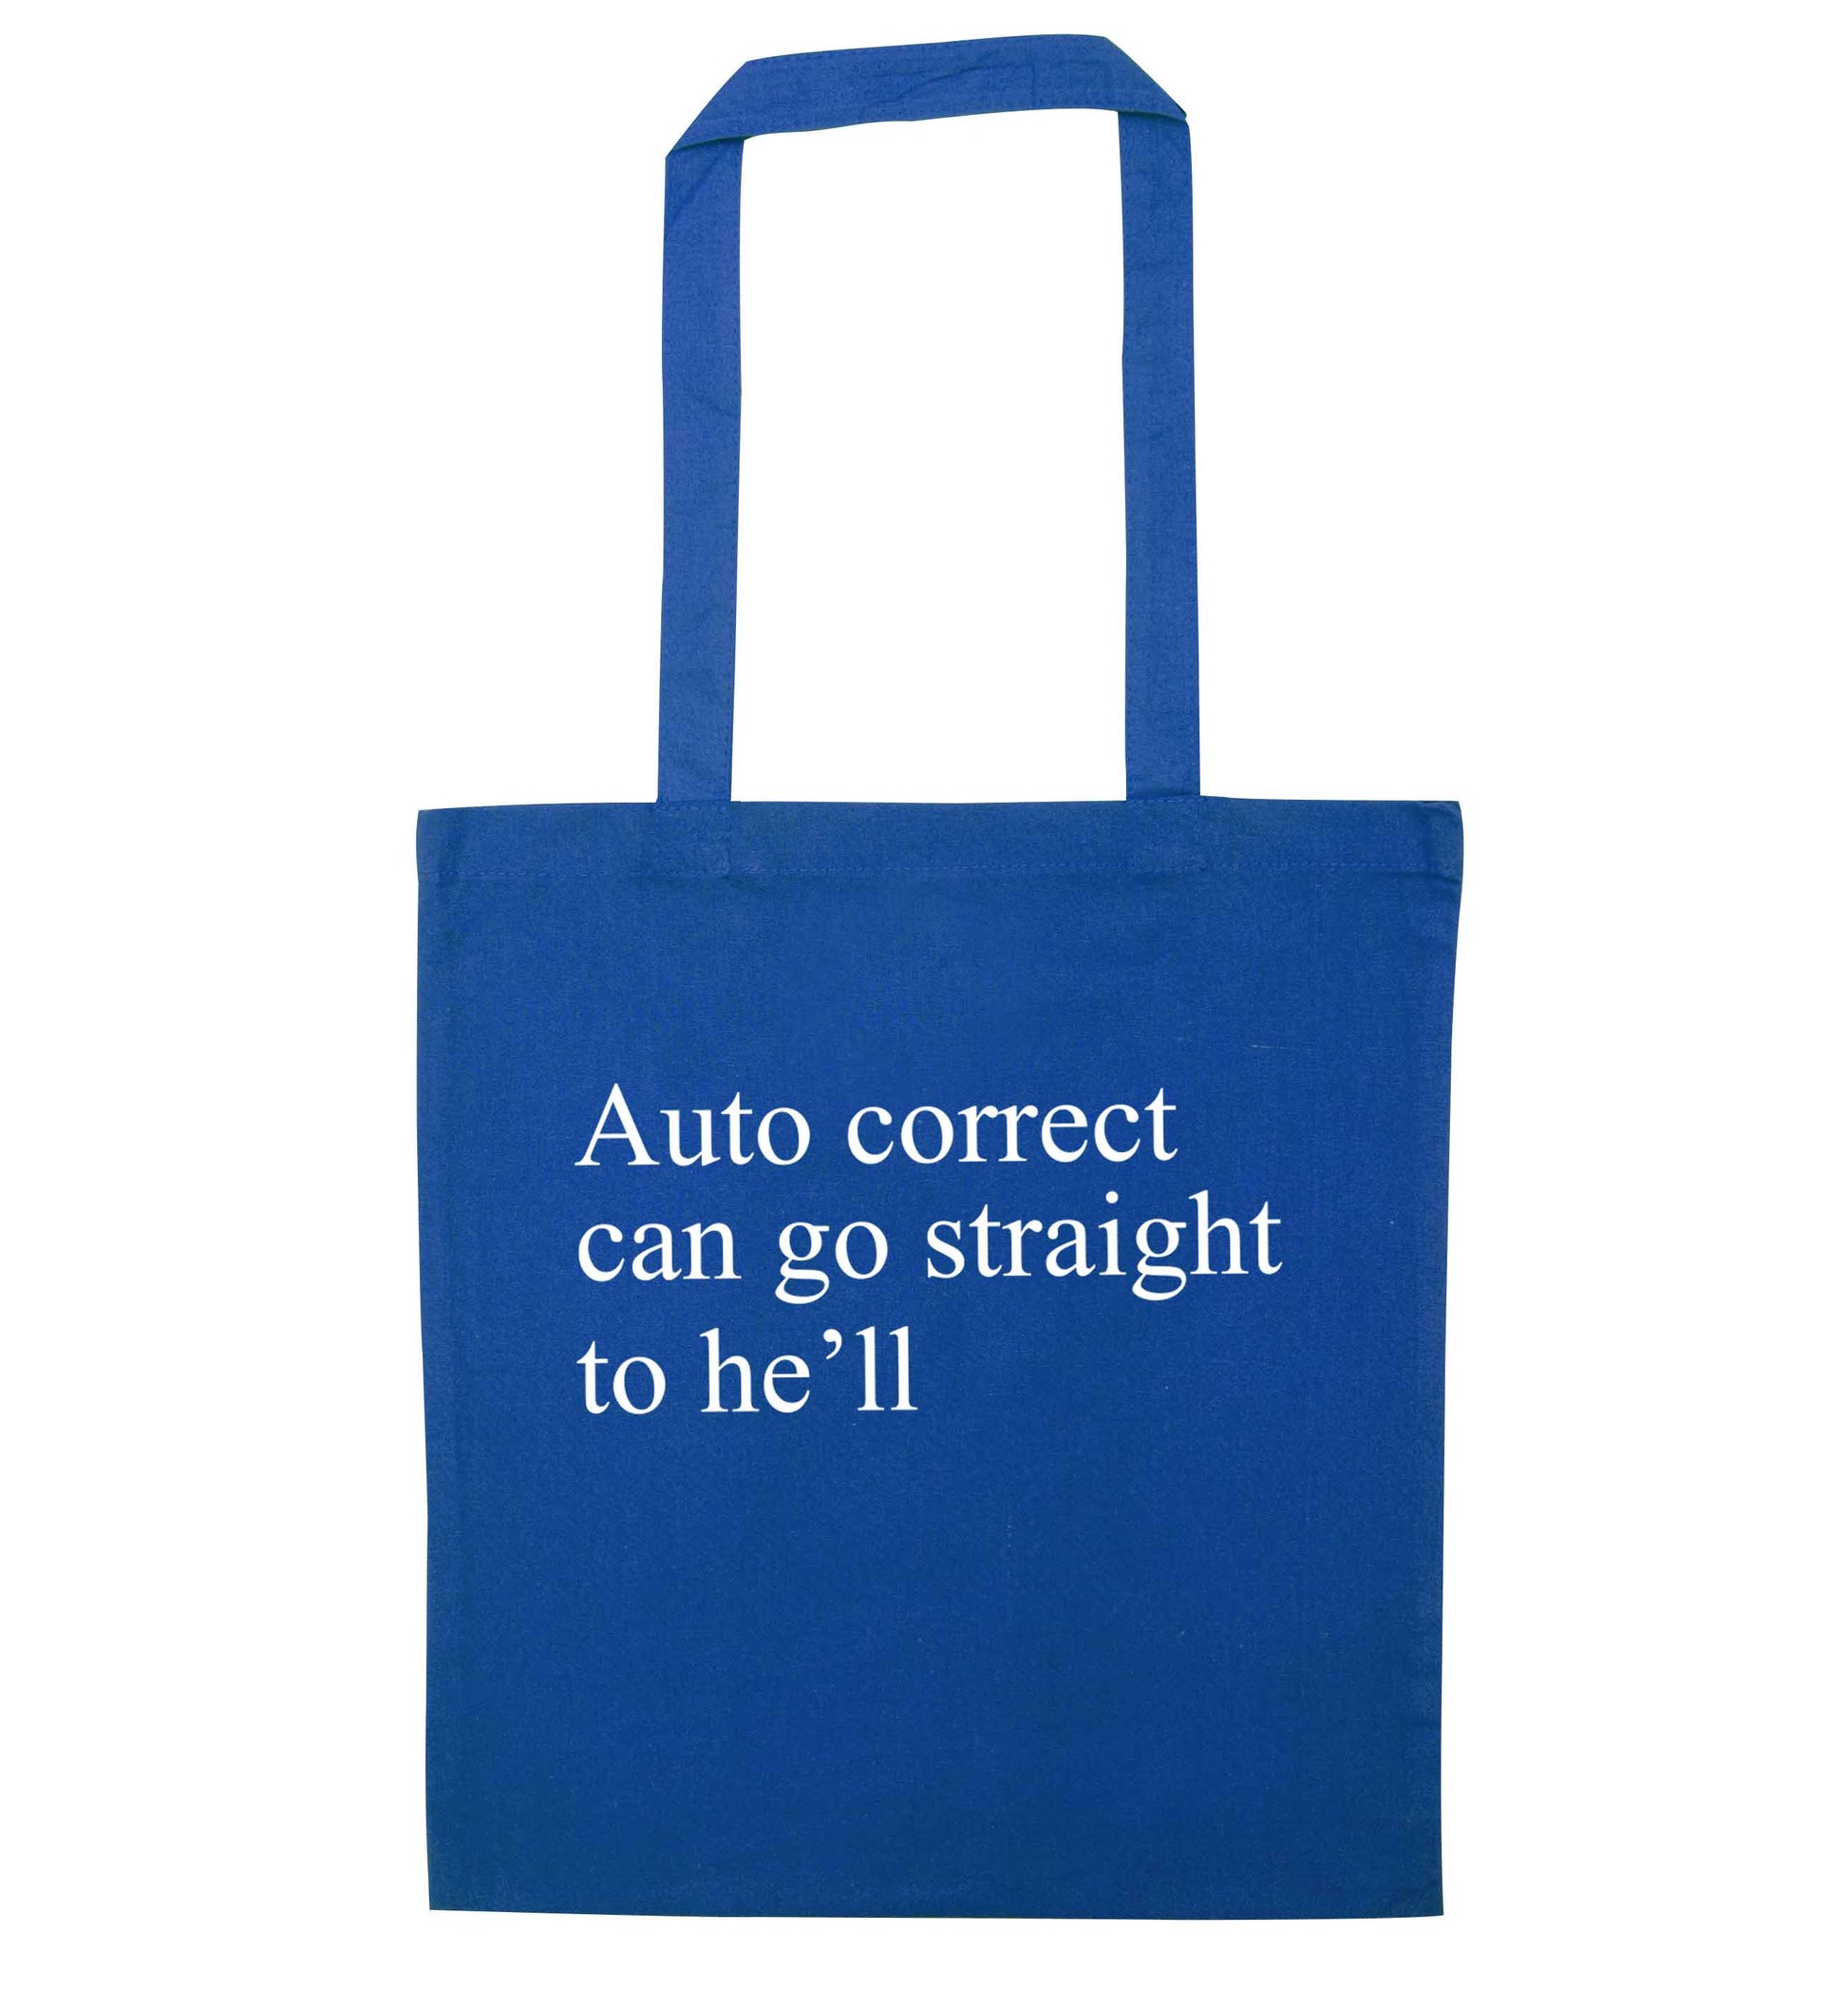 Auto correct can go straight to he'll blue tote bag